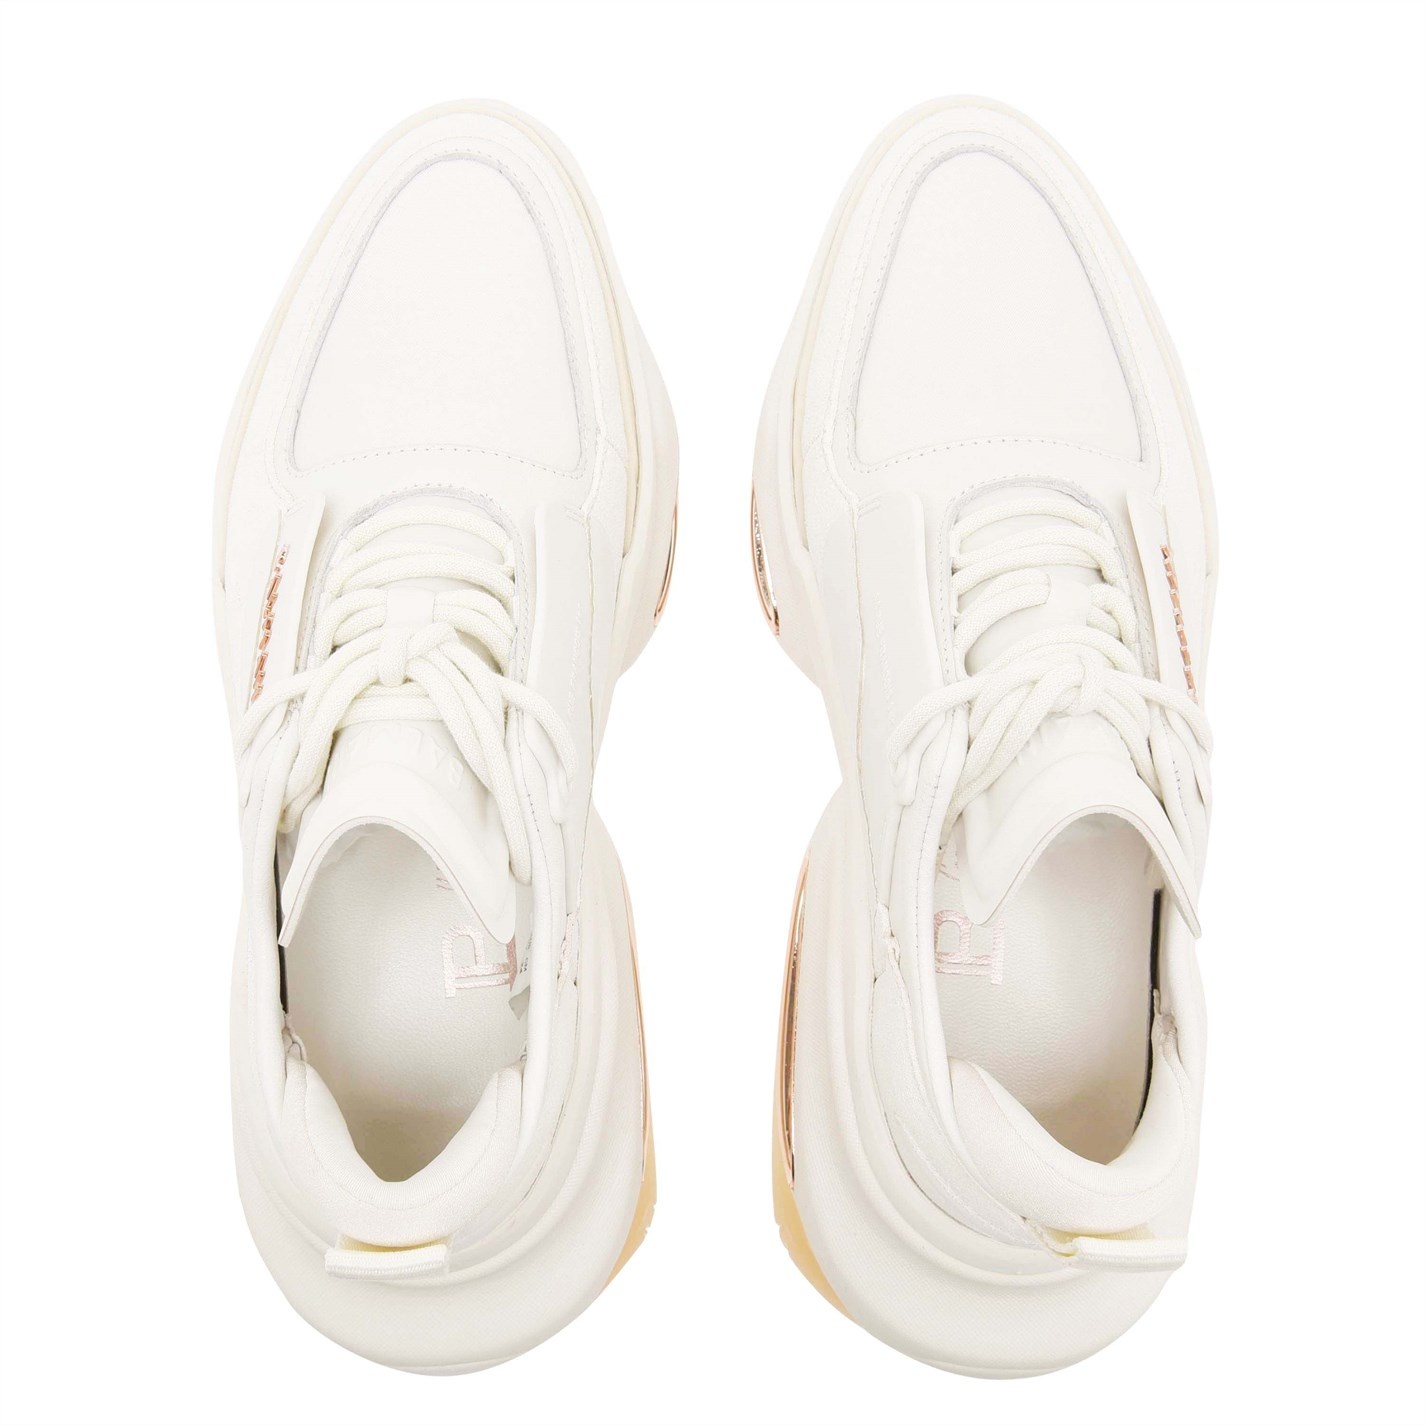 B-BOLD LOW TOP TRAINERS - 7